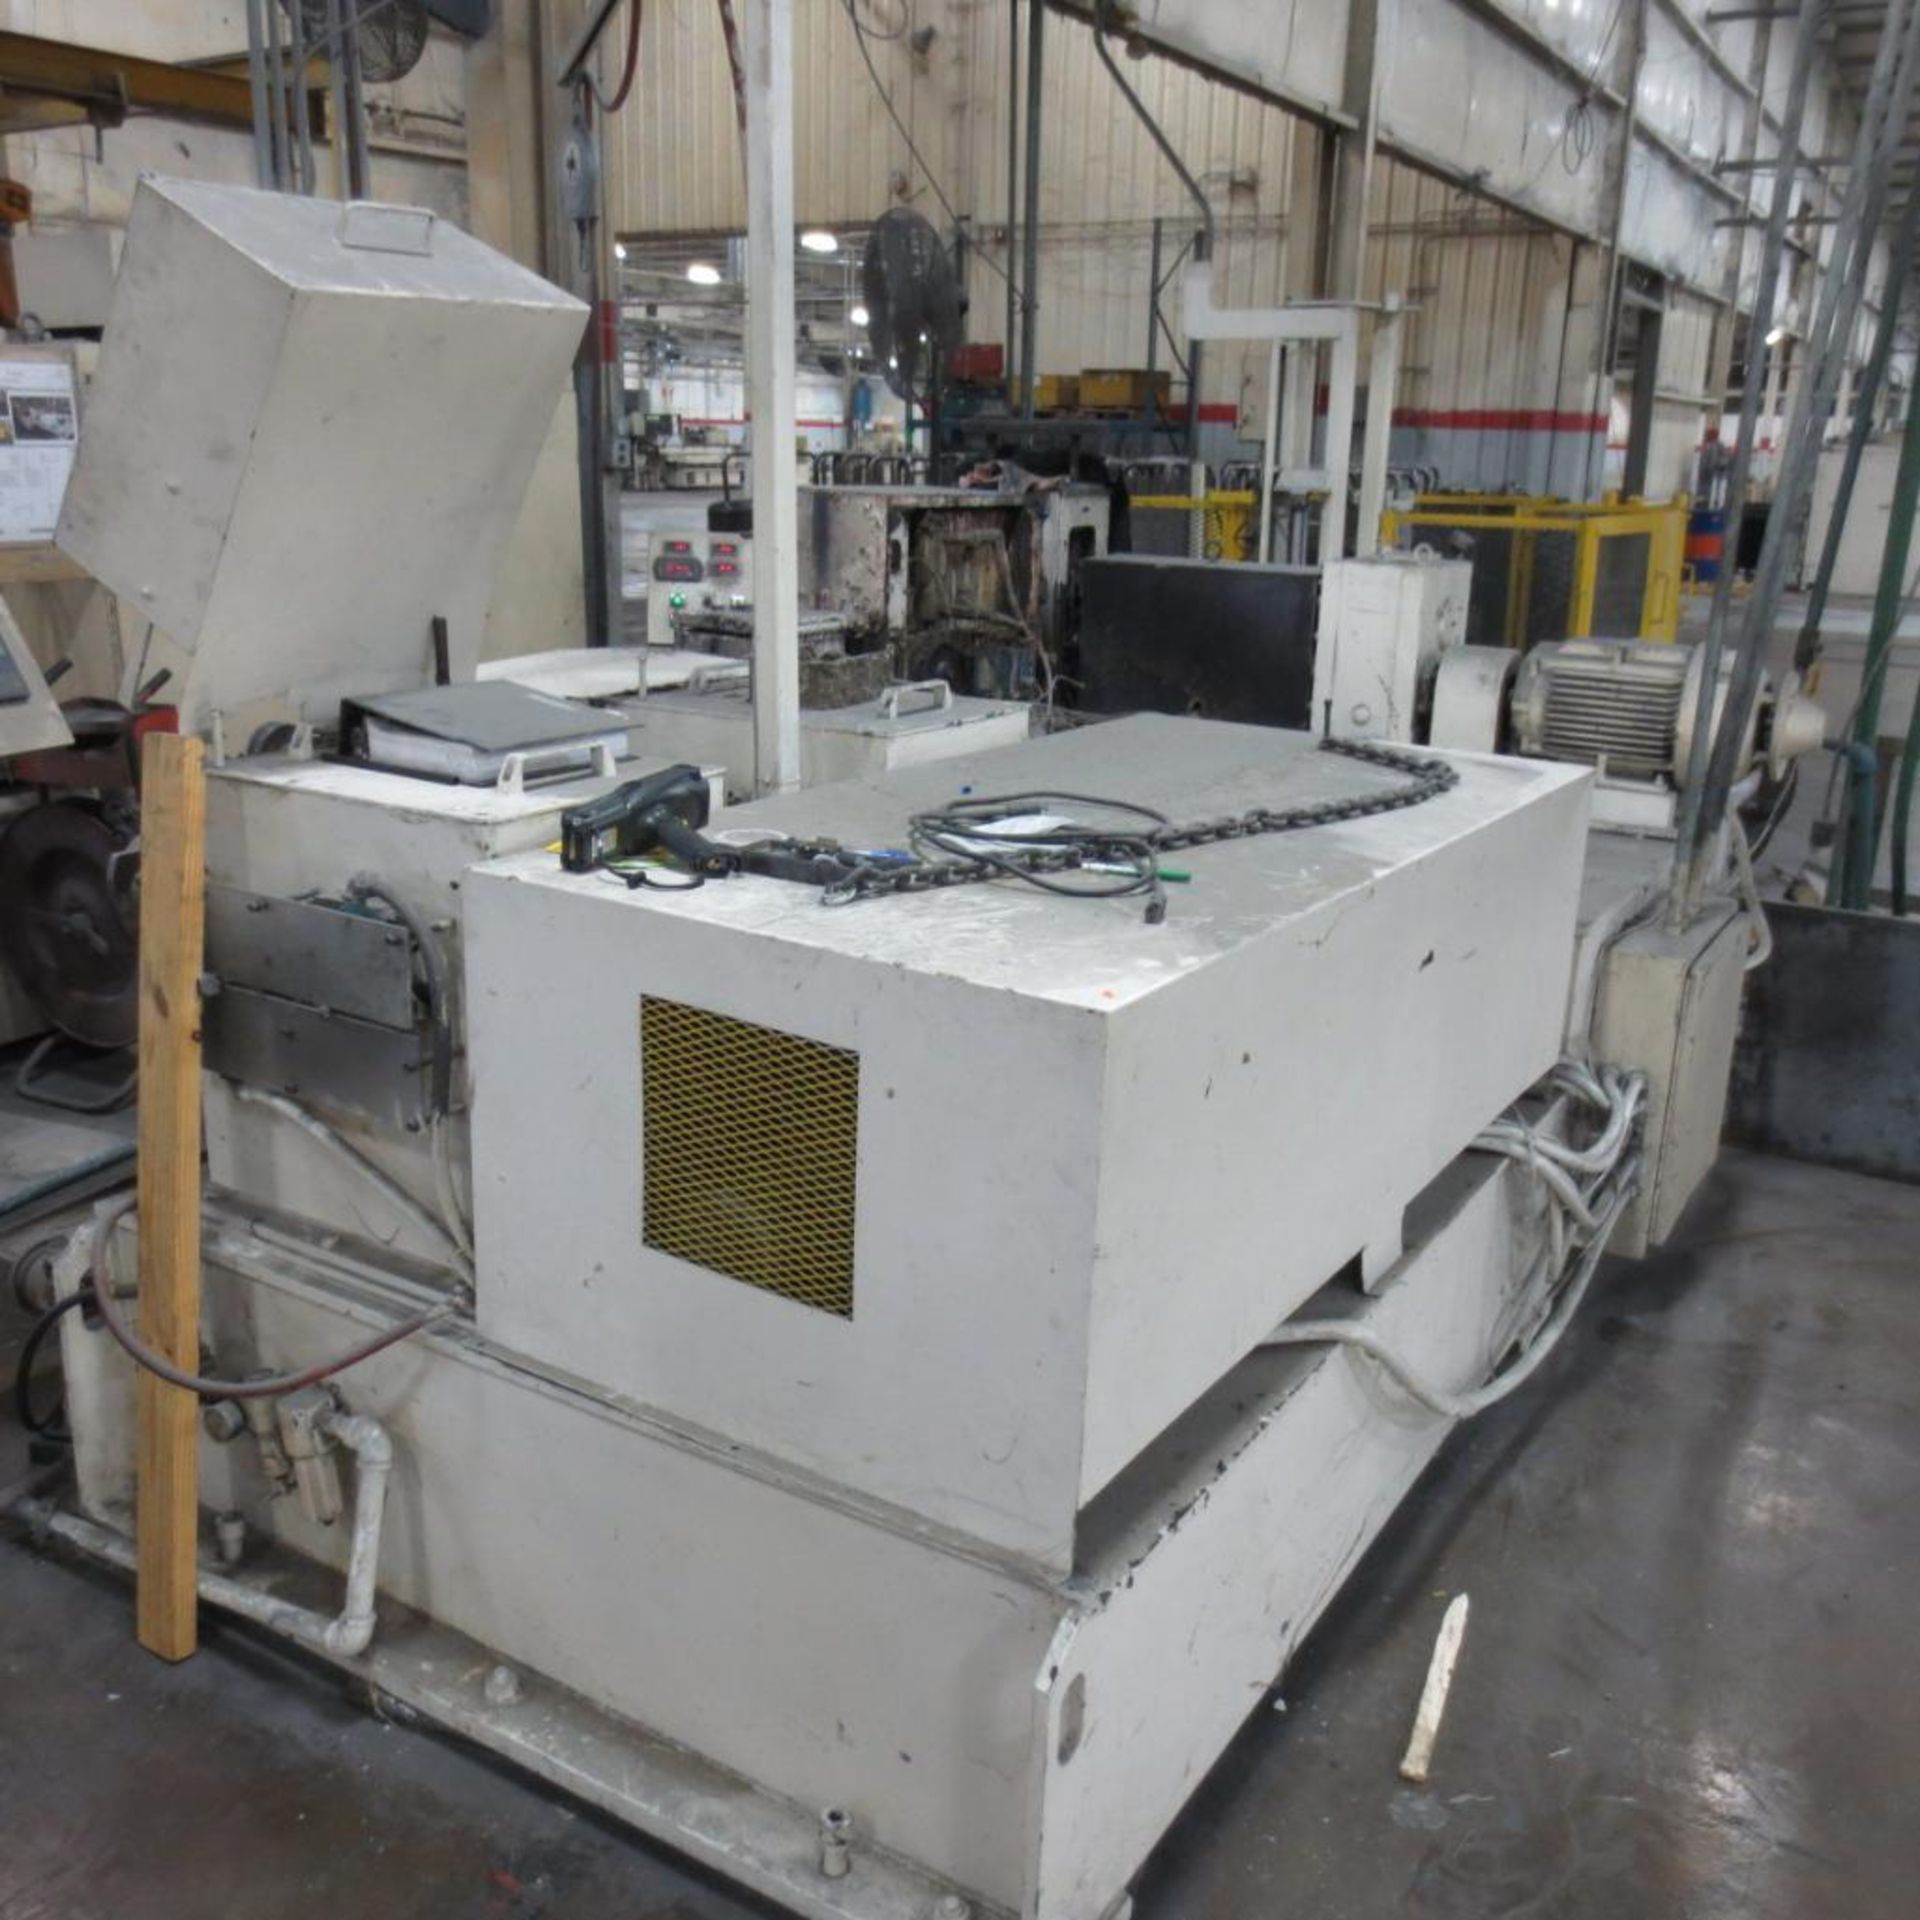 Fenn Model 053 Small Wire Flattening Mill, S/N 5296-C7 ( Review All Lot Photo For More Info ) - Image 5 of 9